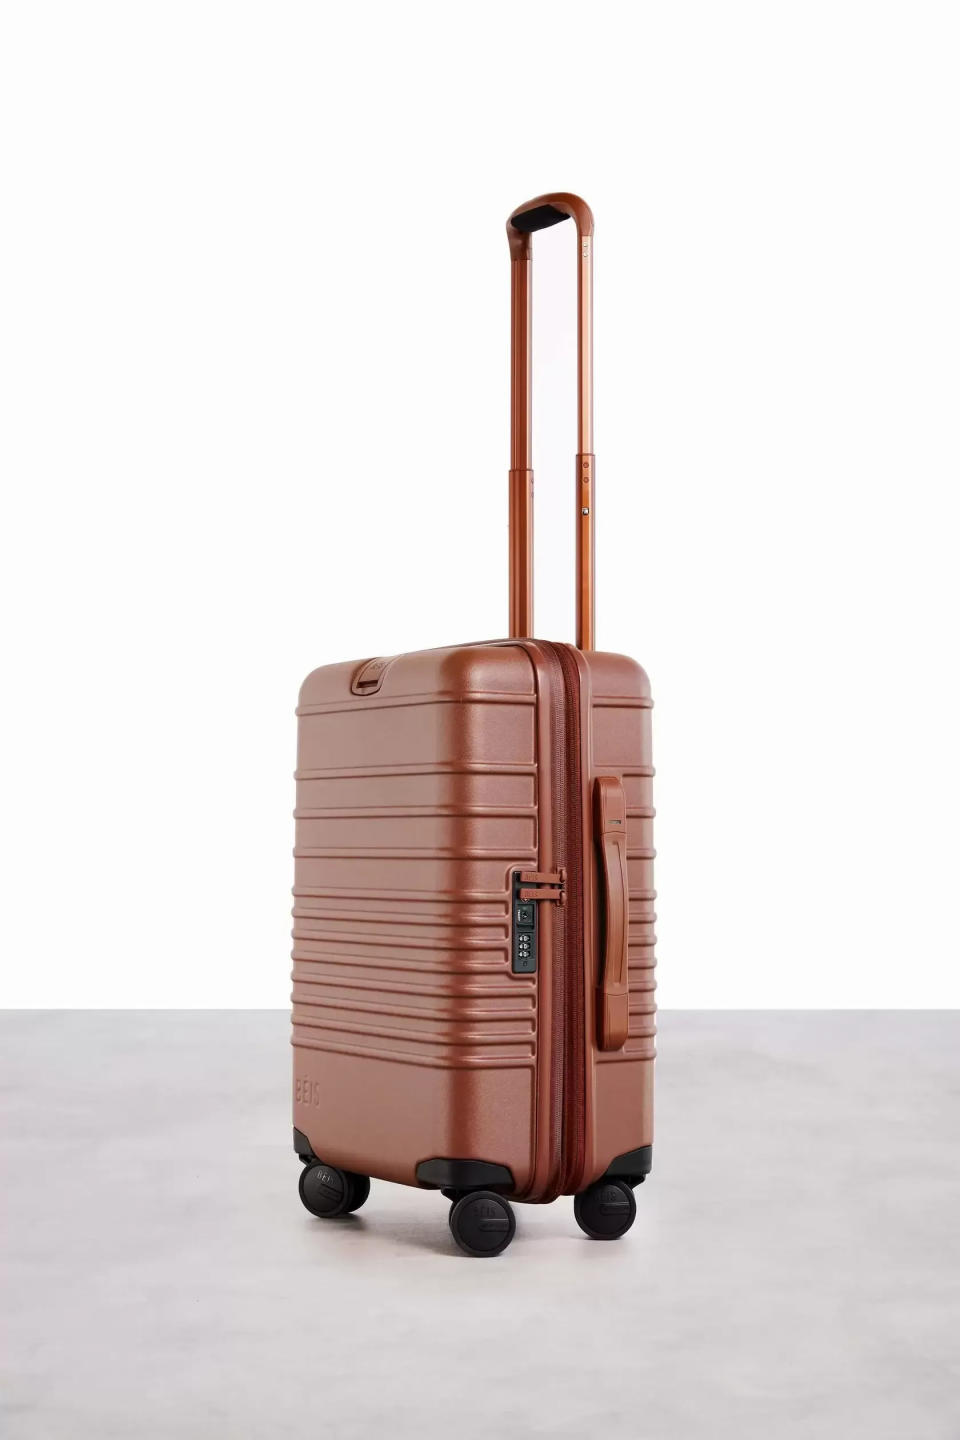 And if you're in the market for a hard-sided carry-on option and don't have to worry about any cobblestone streets: